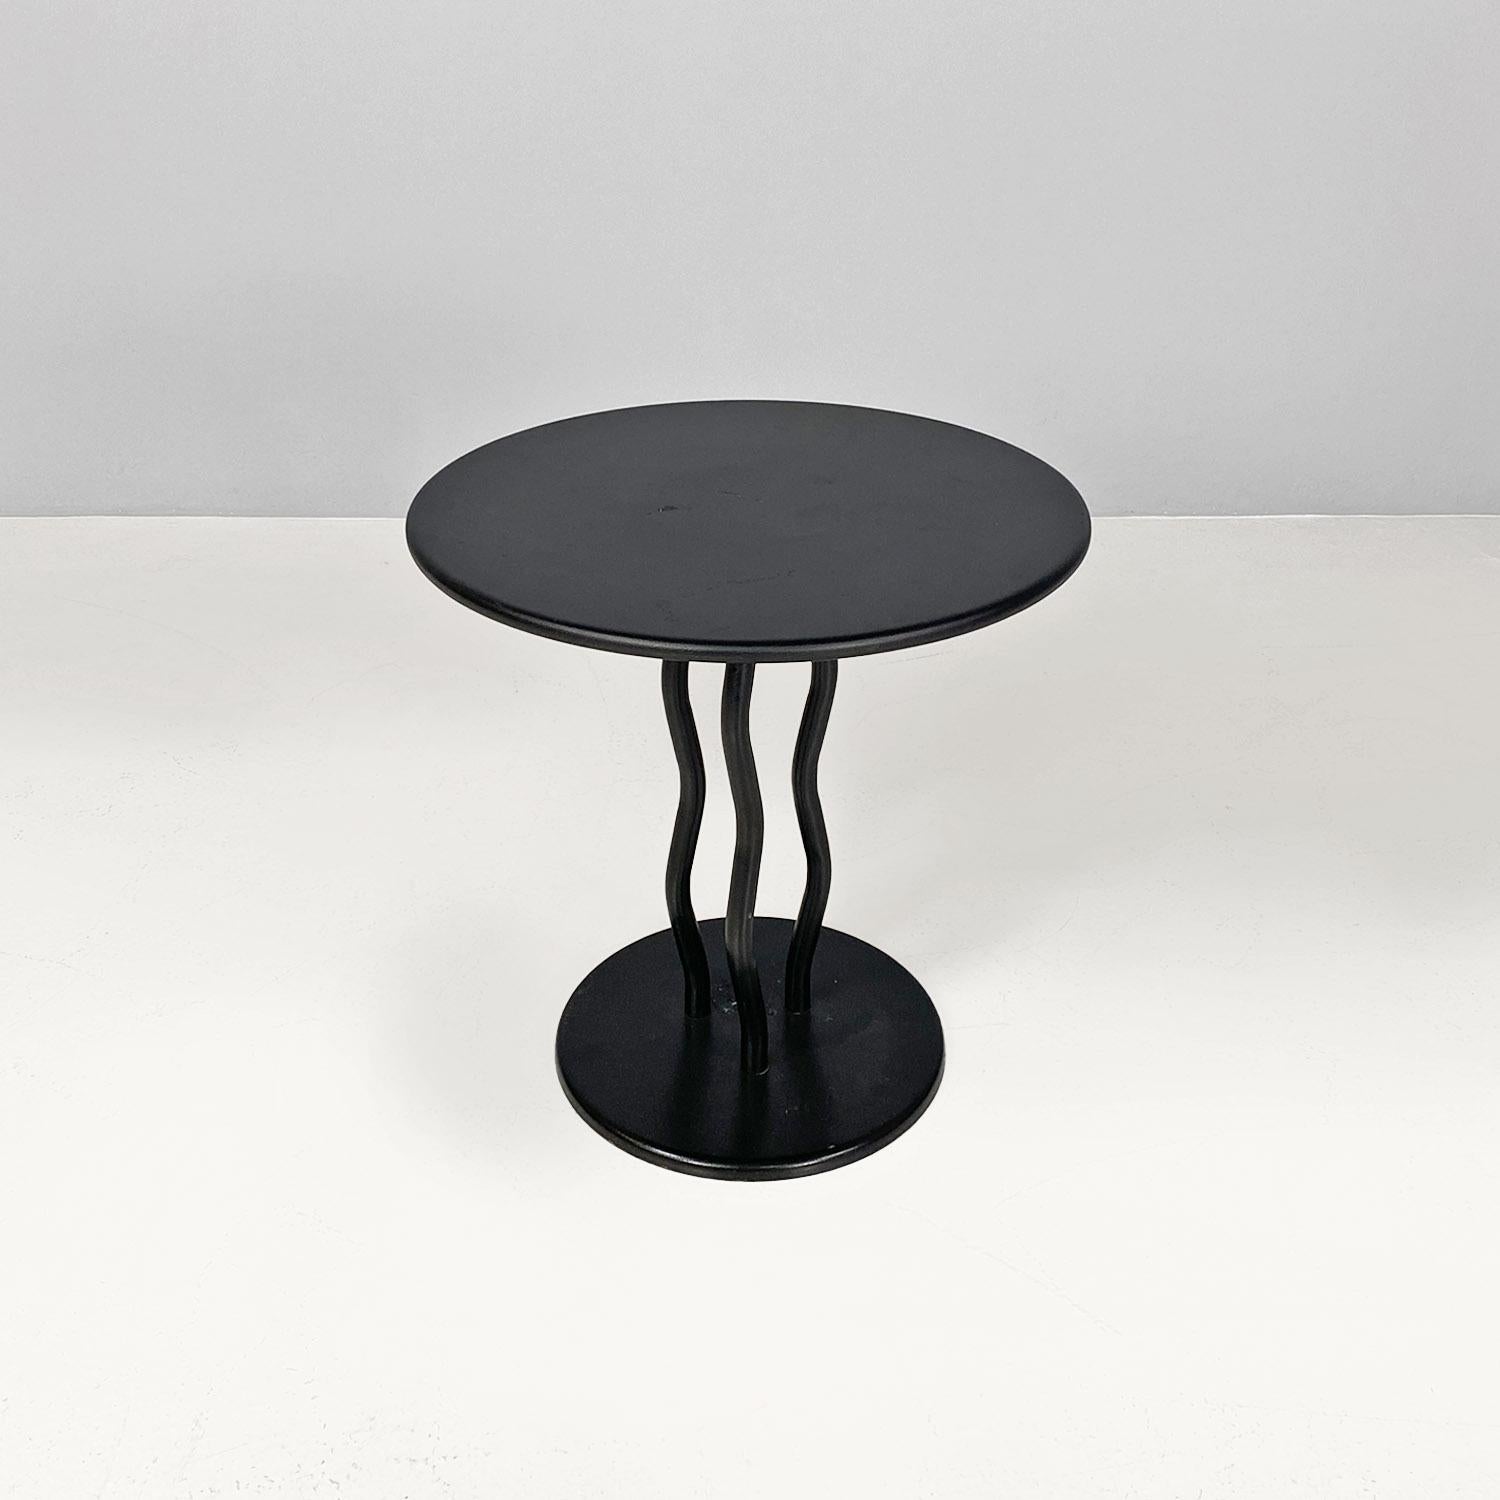 Italian modern black metal round coffee table with three vawy legs, 1980s.
Coffee table with round top in black painted metal. The structure is composed of a round top supported by 3 undulating tubular legs and a single round foot, in black painted